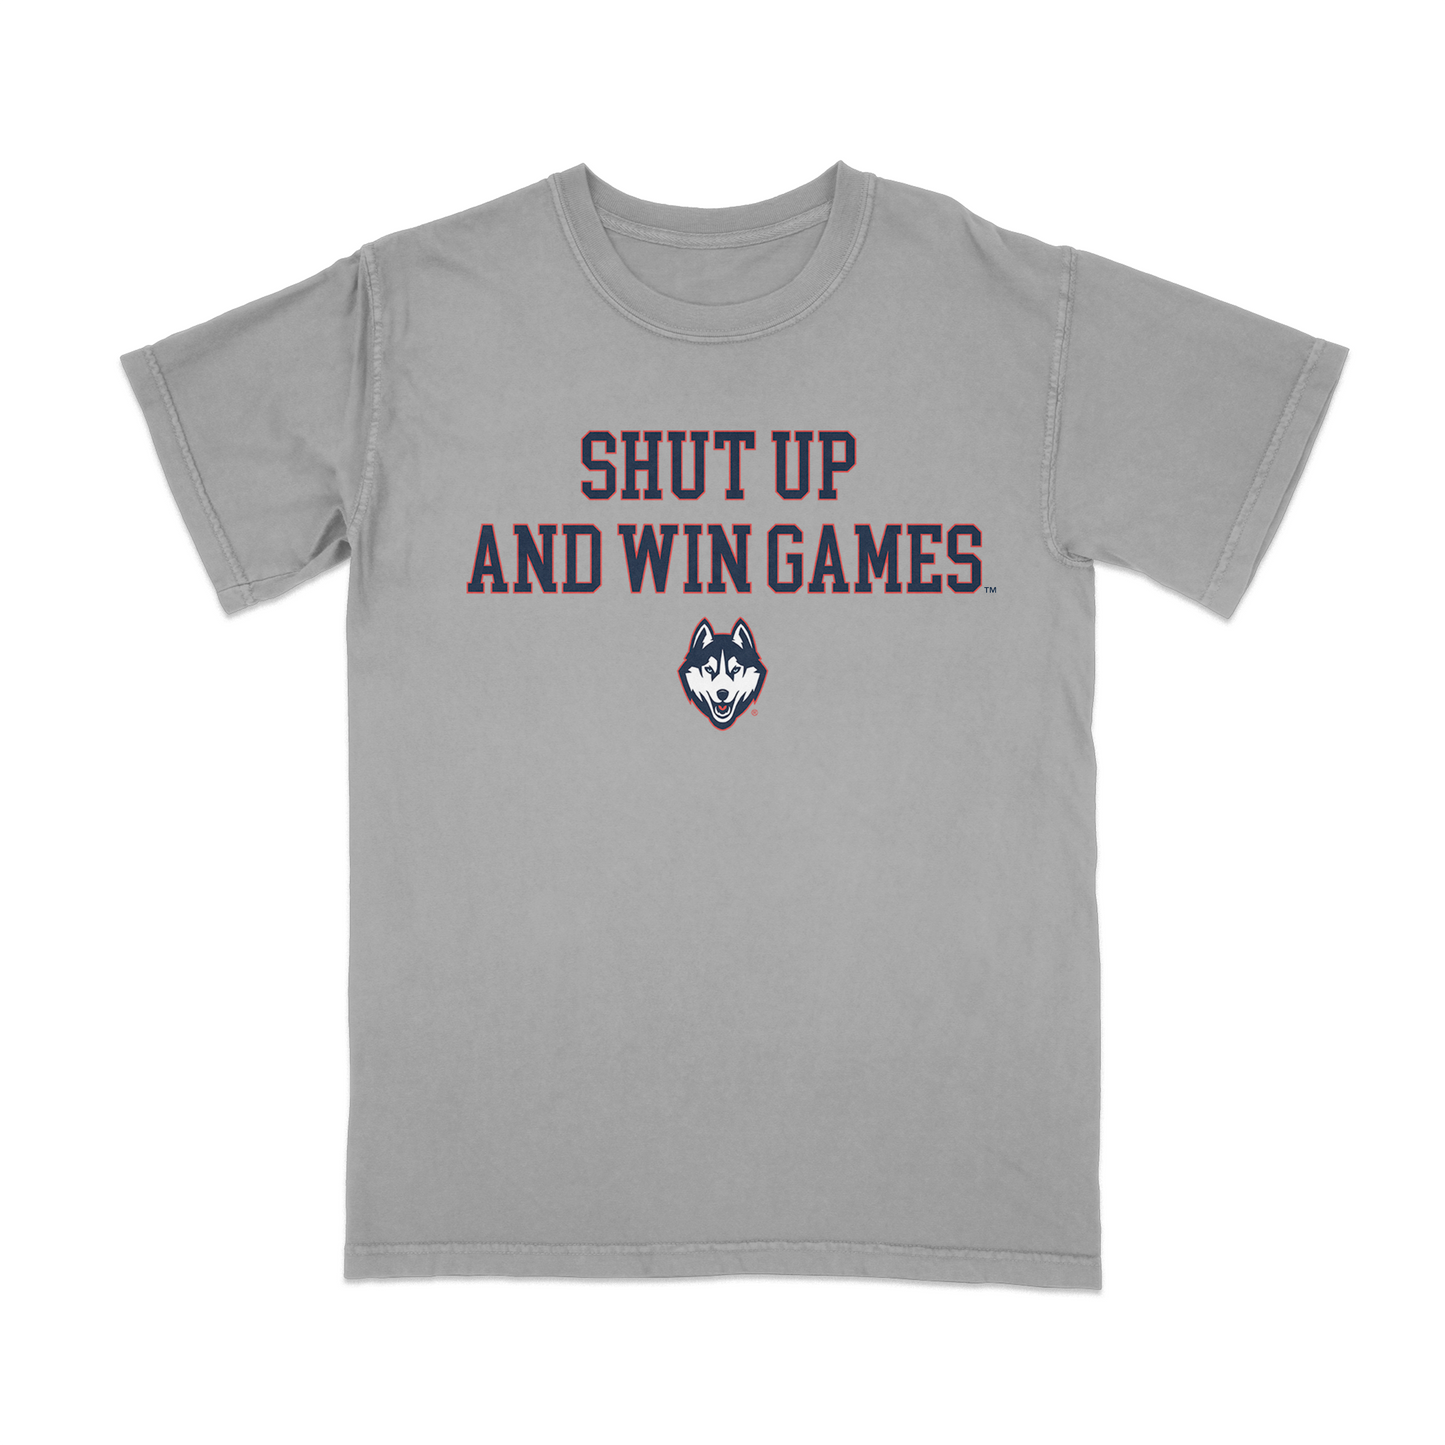 LIMITED RELEASE: UConn Shut Up and Win Games Tee in Grey